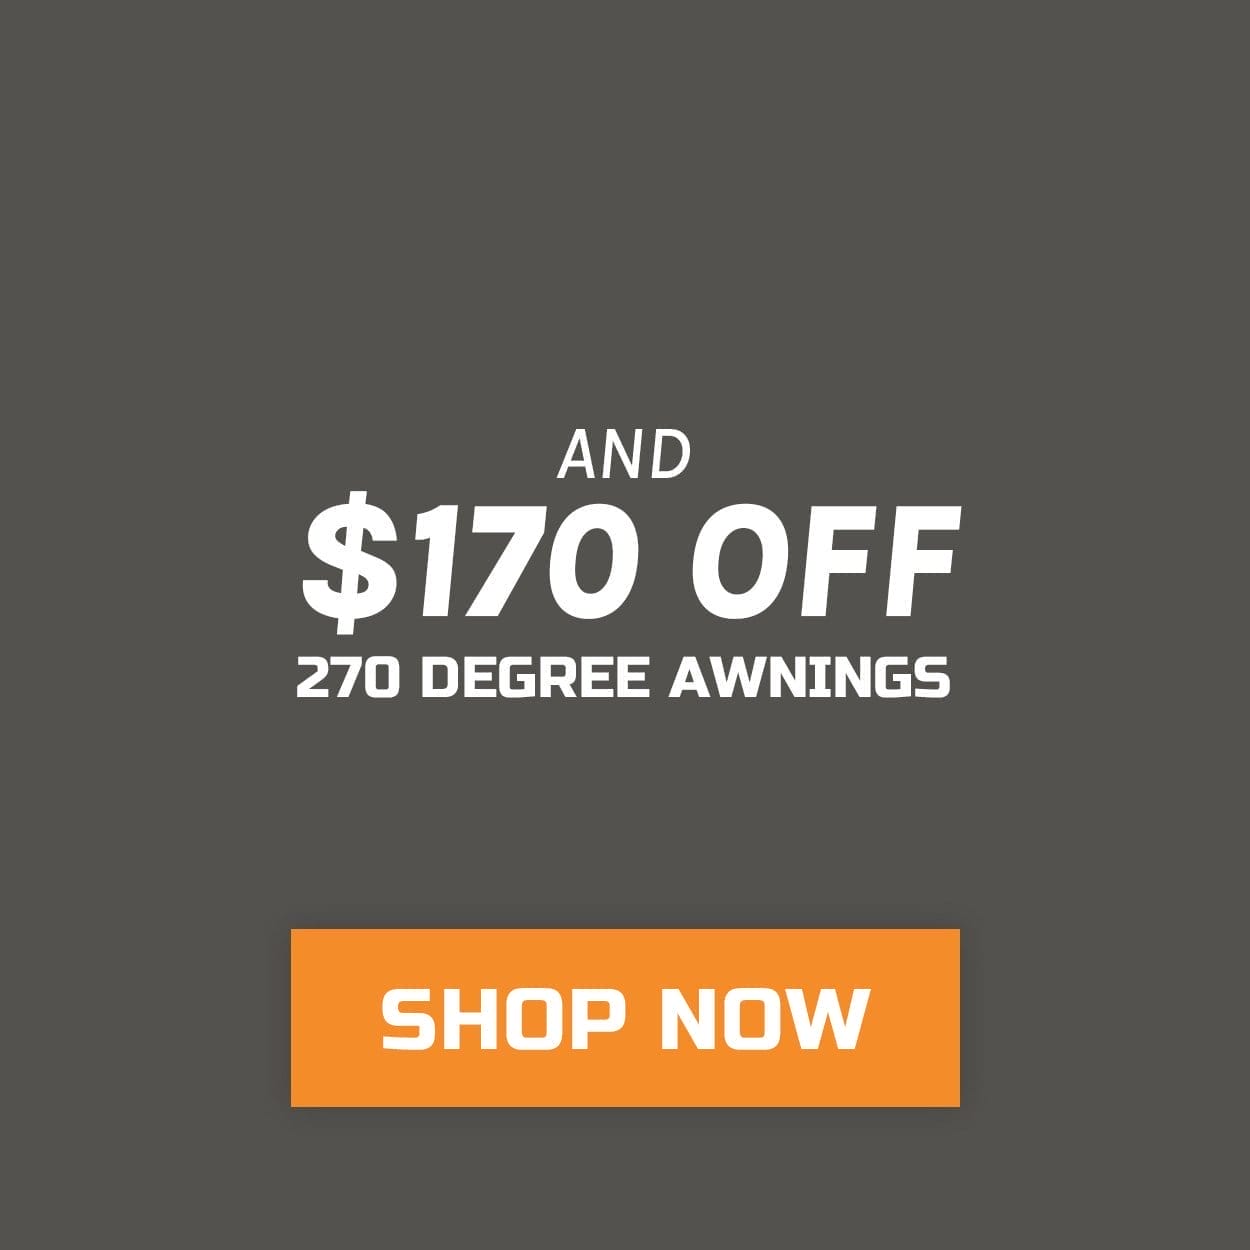 And \\$170 off 270 Degree Awnings